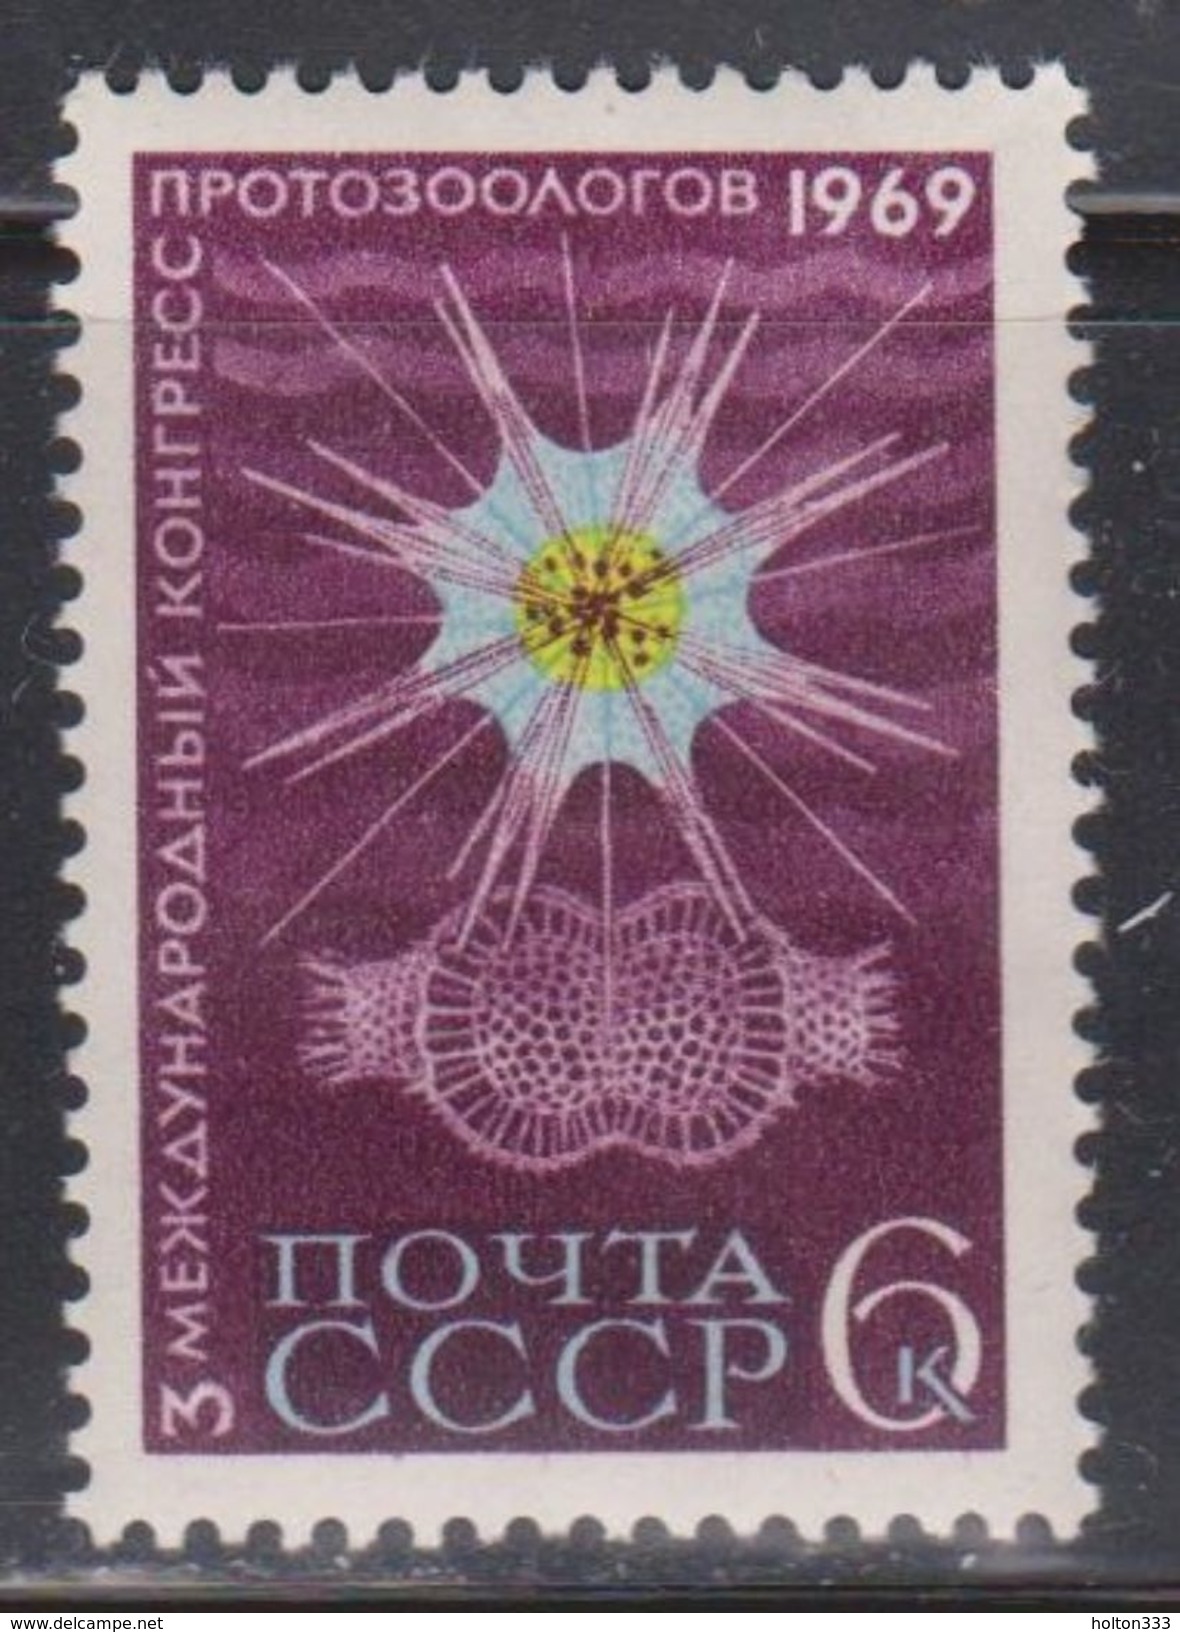 RUSSIA Scott # 3605 Mint Hinged - Protozoologists Conference - Correo Urgente